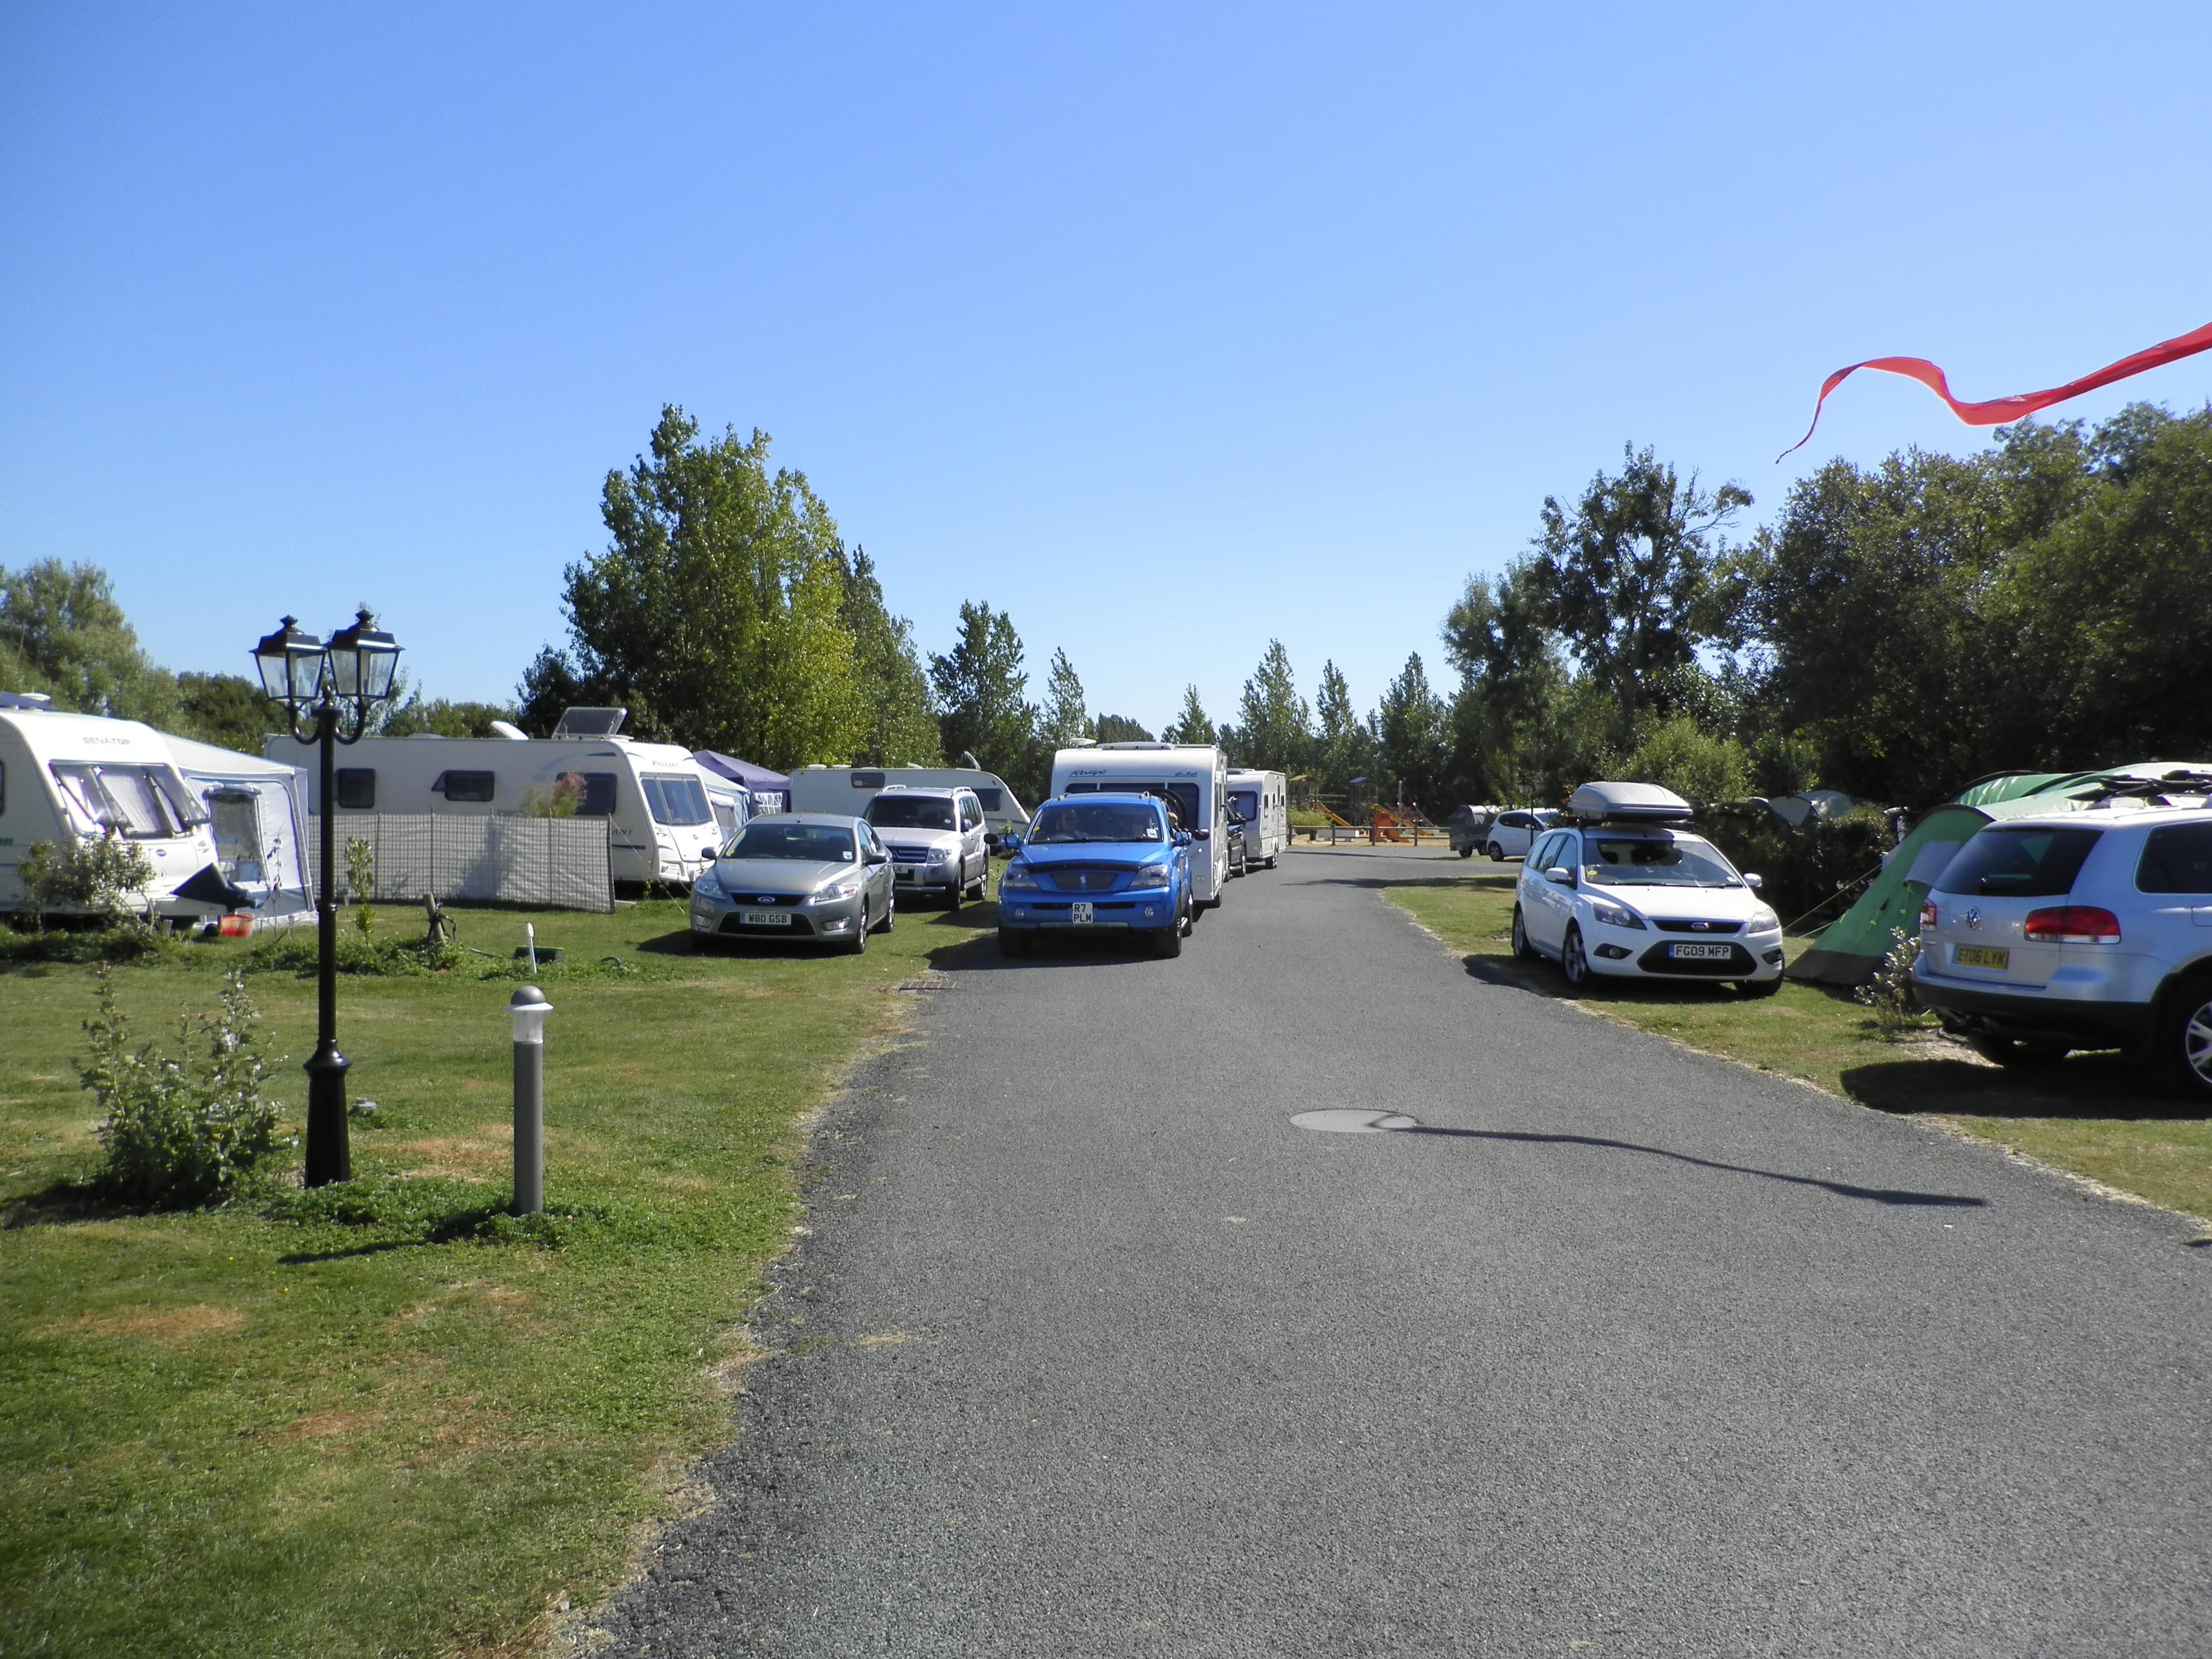 Pitch caravan – 7.50 m  (water, electricity, drain, 2 people and 1 vehicle) 1/2 Ppl. 1/2 Ppl.